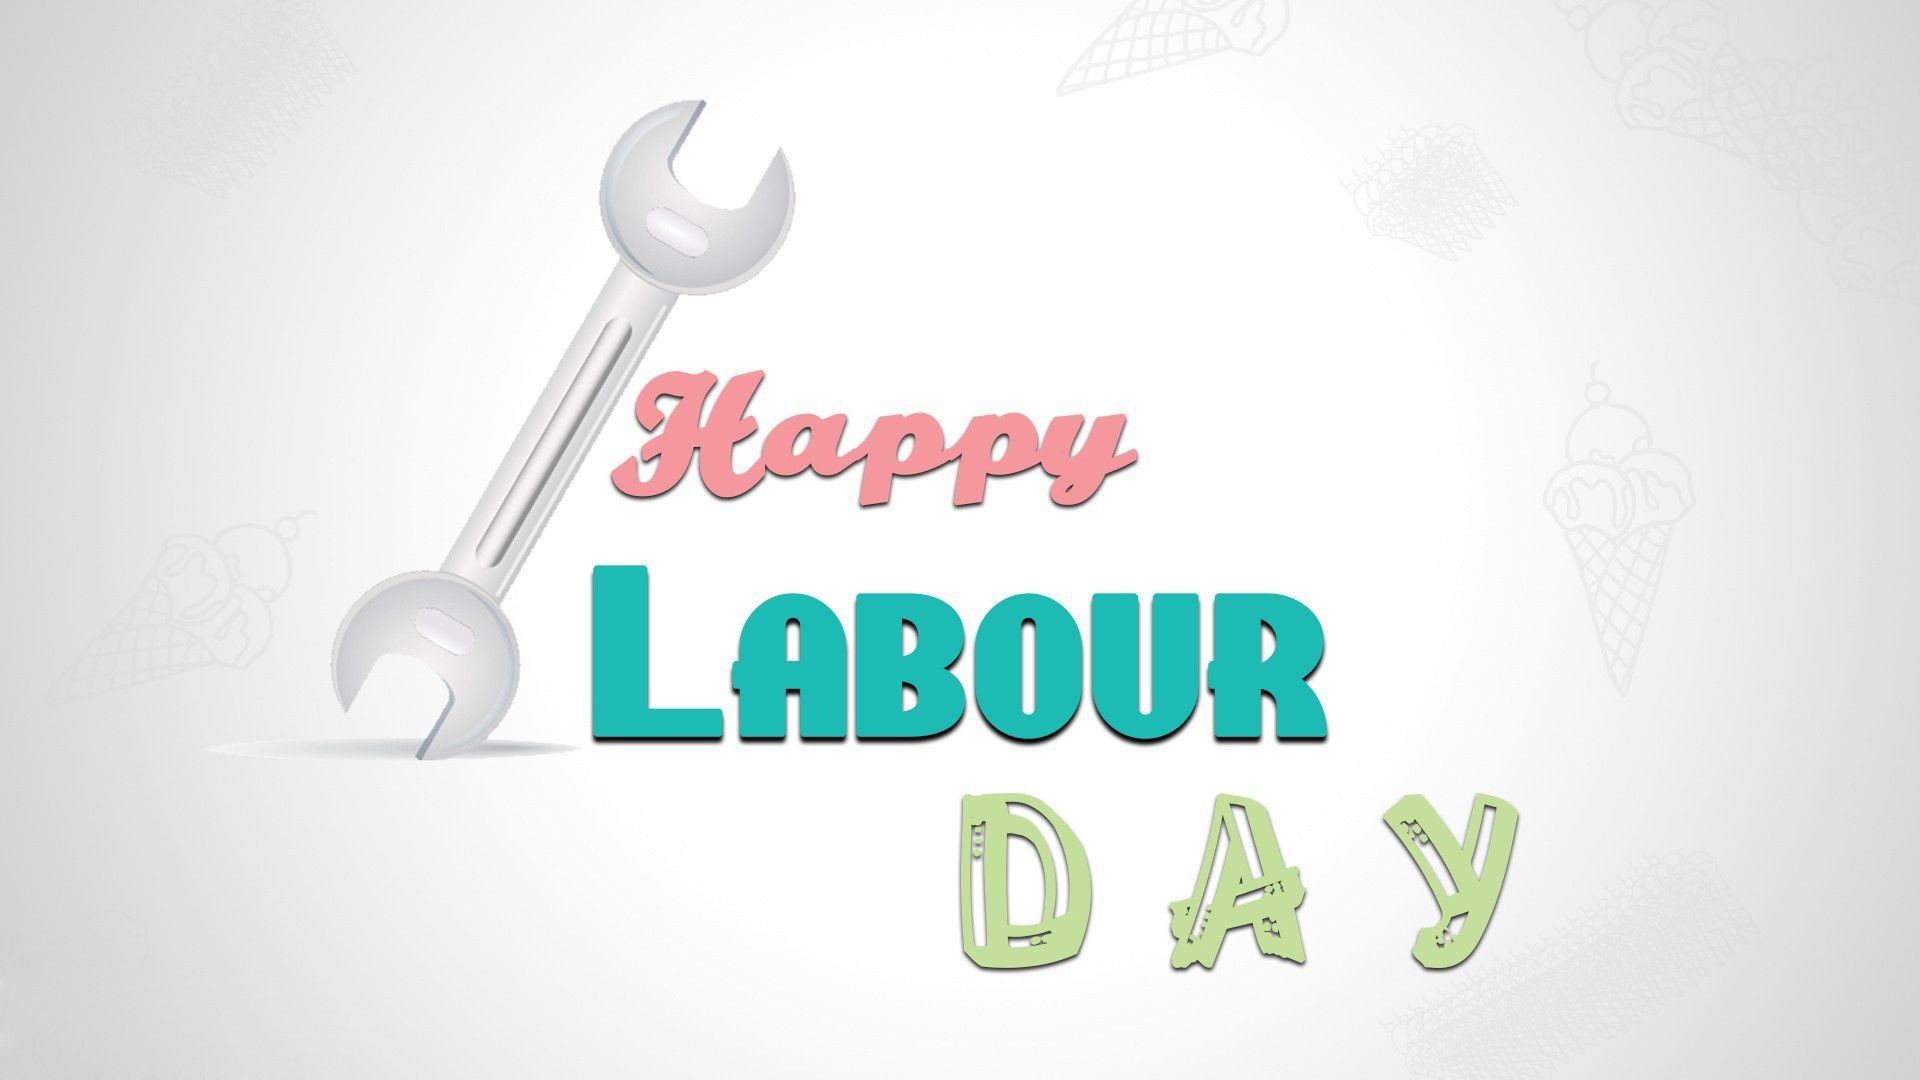 1920x1080 Labour day hd images